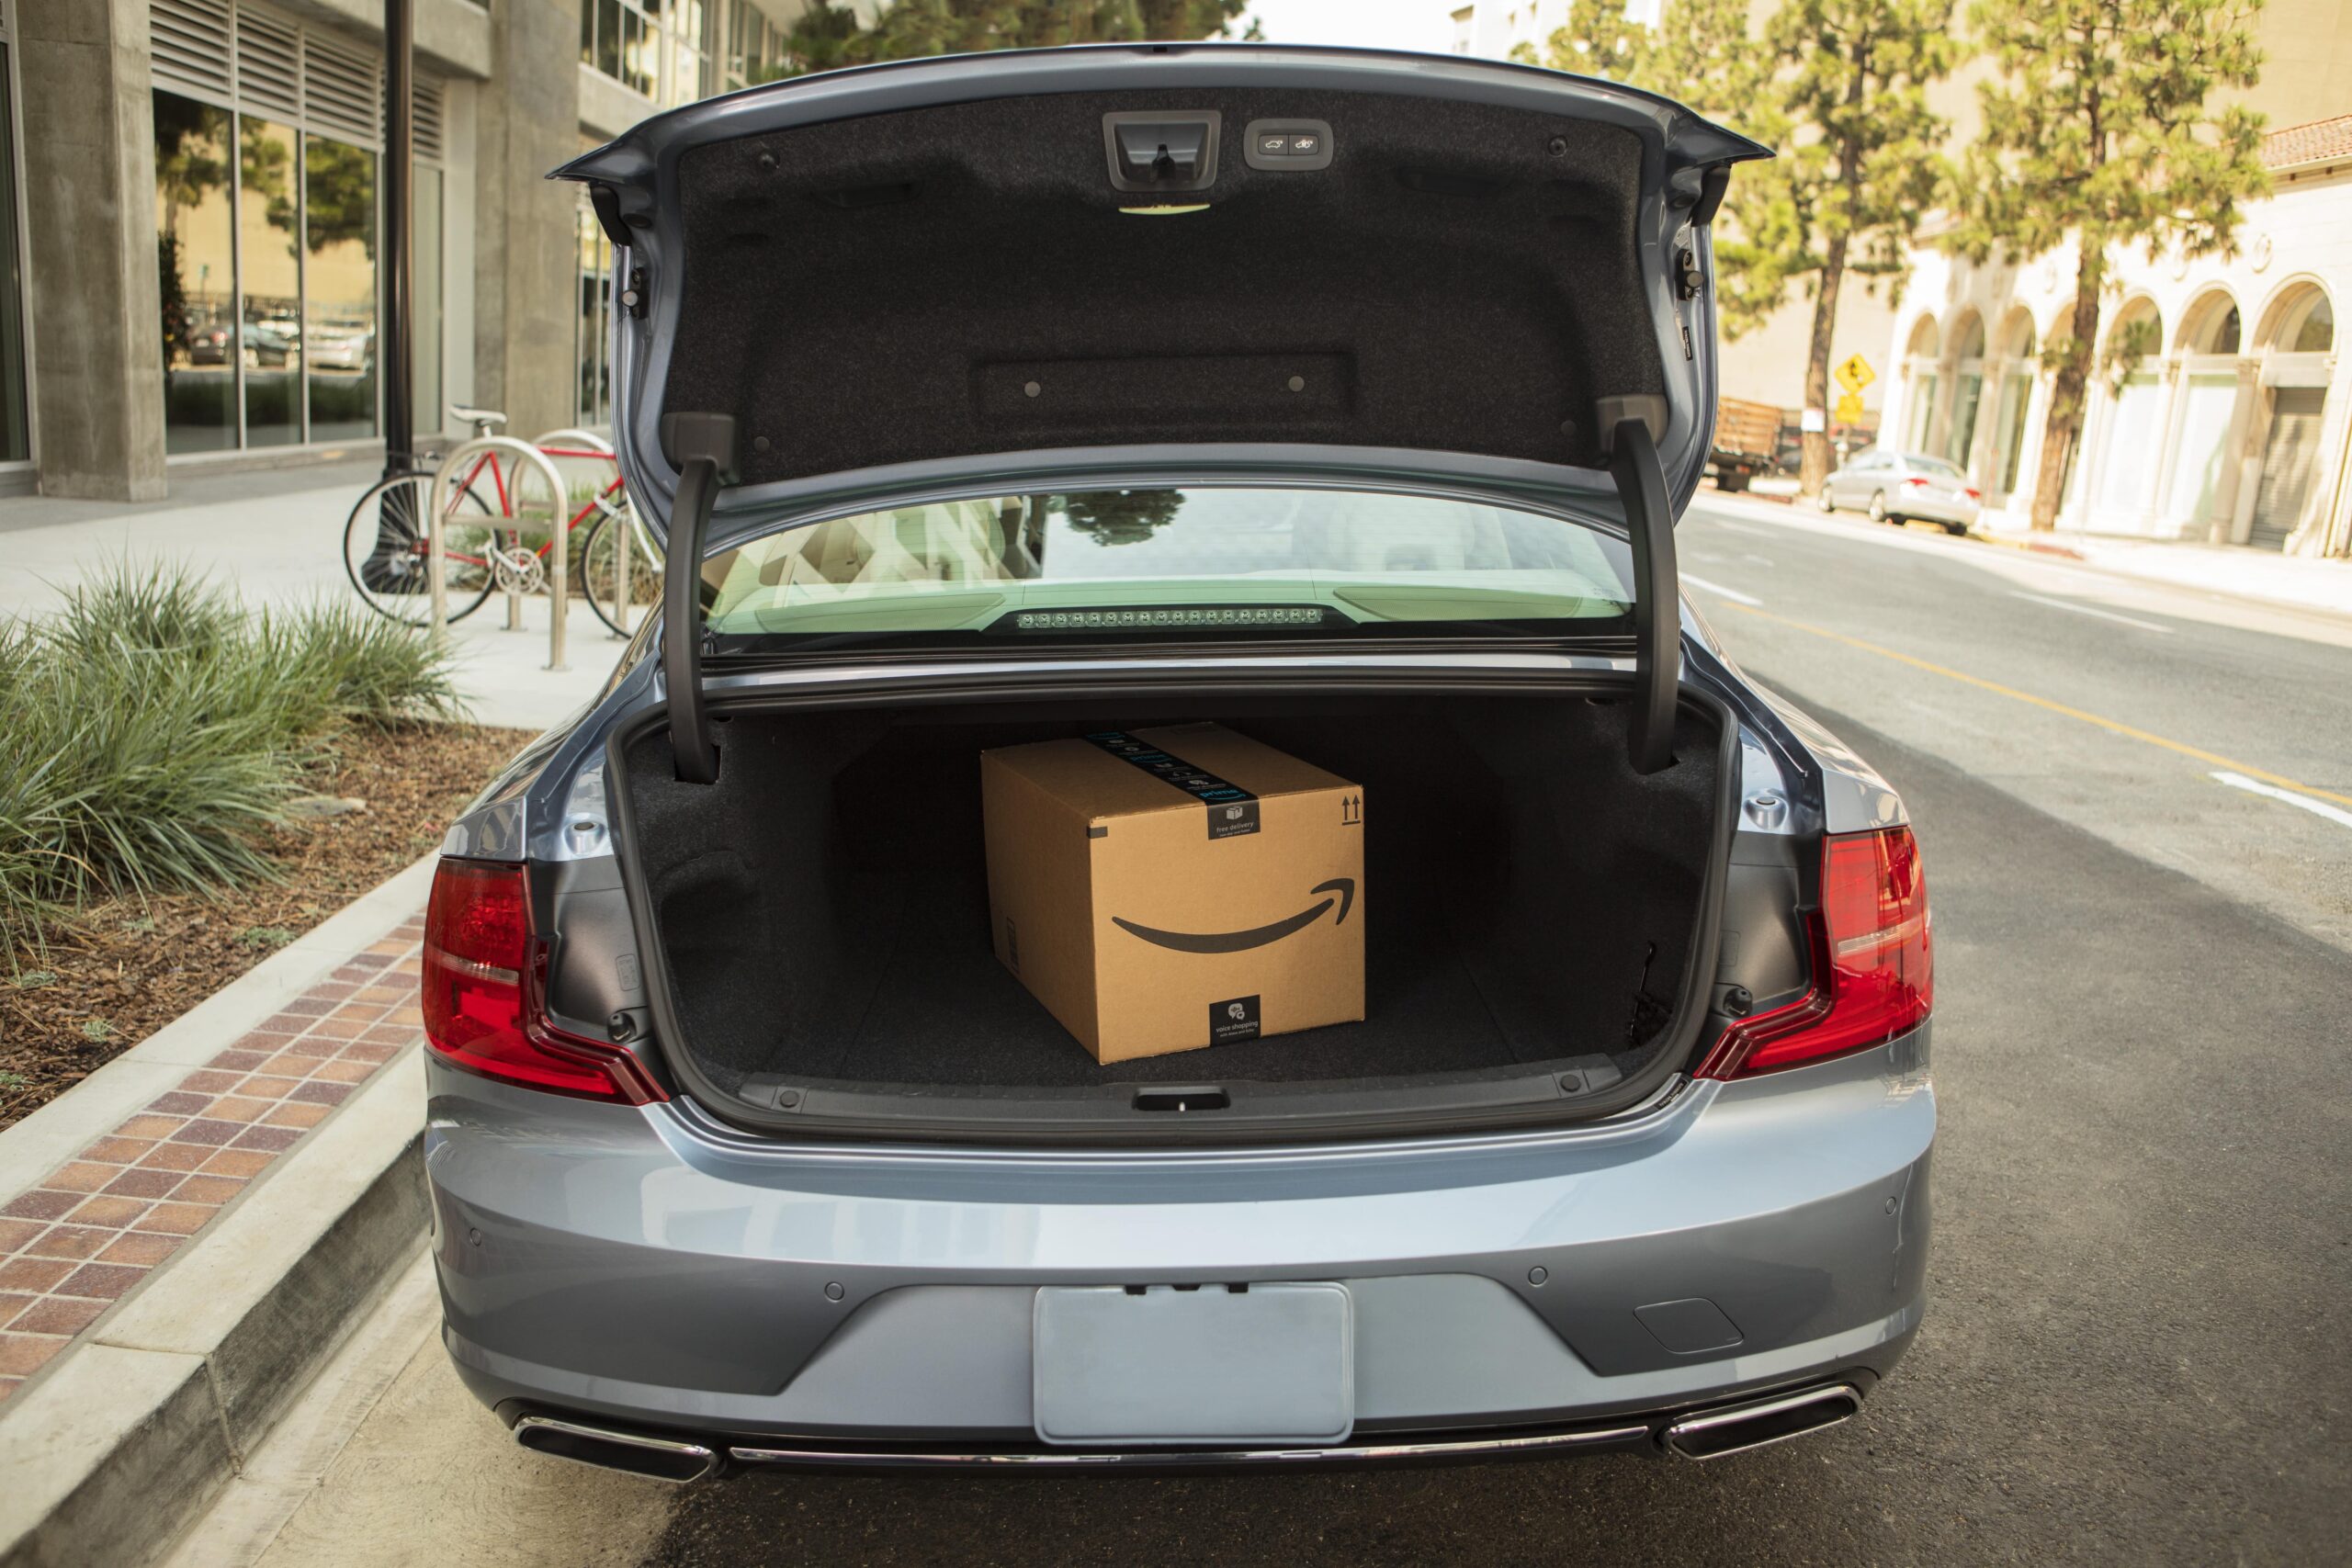 What Amazon’s in-car delivery service means for your vehicle’s future